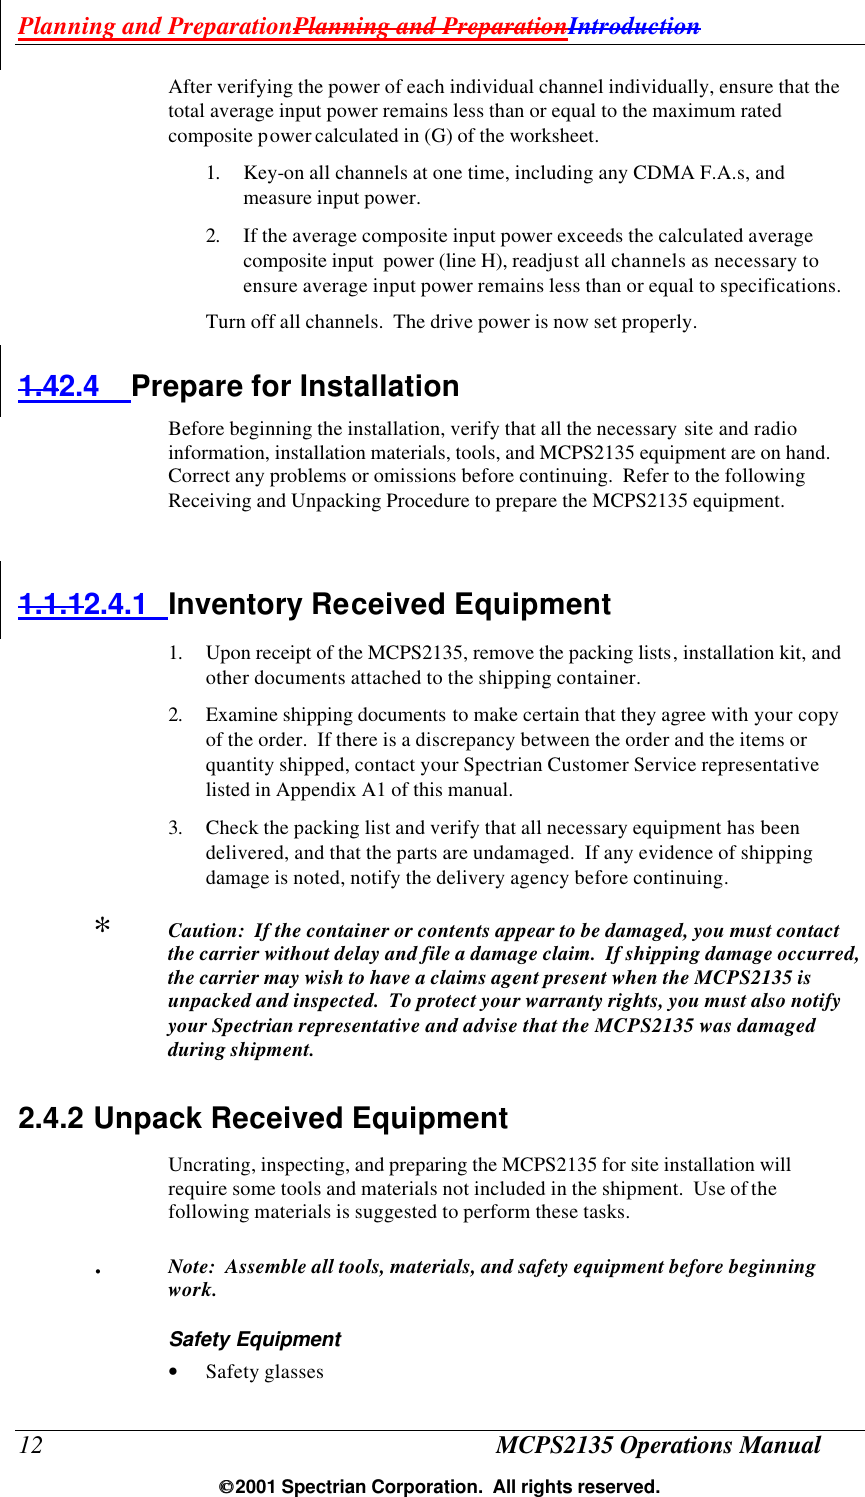 Planning and PreparationPlanning and PreparationIntroduction 12 MCPS2135 Operations Manual  2001 Spectrian Corporation.  All rights reserved. After verifying the power of each individual channel individually, ensure that the total average input power remains less than or equal to the maximum rated composite power calculated in (G) of the worksheet. 1. Key-on all channels at one time, including any CDMA F.A.s, and measure input power. 2. If the average composite input power exceeds the calculated average composite input  power (line H), readjust all channels as necessary to ensure average input power remains less than or equal to specifications.  Turn off all channels.  The drive power is now set properly. 1.42.4 Prepare for Installation Before beginning the installation, verify that all the necessary site and radio information, installation materials, tools, and MCPS2135 equipment are on hand.  Correct any problems or omissions before continuing.  Refer to the following Receiving and Unpacking Procedure to prepare the MCPS2135 equipment.  1.1.12.4.1 Inventory Received Equipment 1. Upon receipt of the MCPS2135, remove the packing lists, installation kit, and other documents attached to the shipping container. 2. Examine shipping documents to make certain that they agree with your copy of the order.  If there is a discrepancy between the order and the items or quantity shipped, contact your Spectrian Customer Service representative listed in Appendix A1 of this manual. 3. Check the packing list and verify that all necessary equipment has been delivered, and that the parts are undamaged.  If any evidence of shipping damage is noted, notify the delivery agency before continuing. ∗  Caution:  If the container or contents appear to be damaged, you must contact the carrier without delay and file a damage claim.  If shipping damage occurred, the carrier may wish to have a claims agent present when the MCPS2135 is unpacked and inspected.  To protect your warranty rights, you must also notify your Spectrian representative and advise that the MCPS2135 was damaged during shipment. 2.4.2 Unpack Received Equipment Uncrating, inspecting, and preparing the MCPS2135 for site installation will require some tools and materials not included in the shipment.  Use of the following materials is suggested to perform these tasks. .  Note:  Assemble all tools, materials, and safety equipment before beginning work. Safety Equipment • Safety glasses 